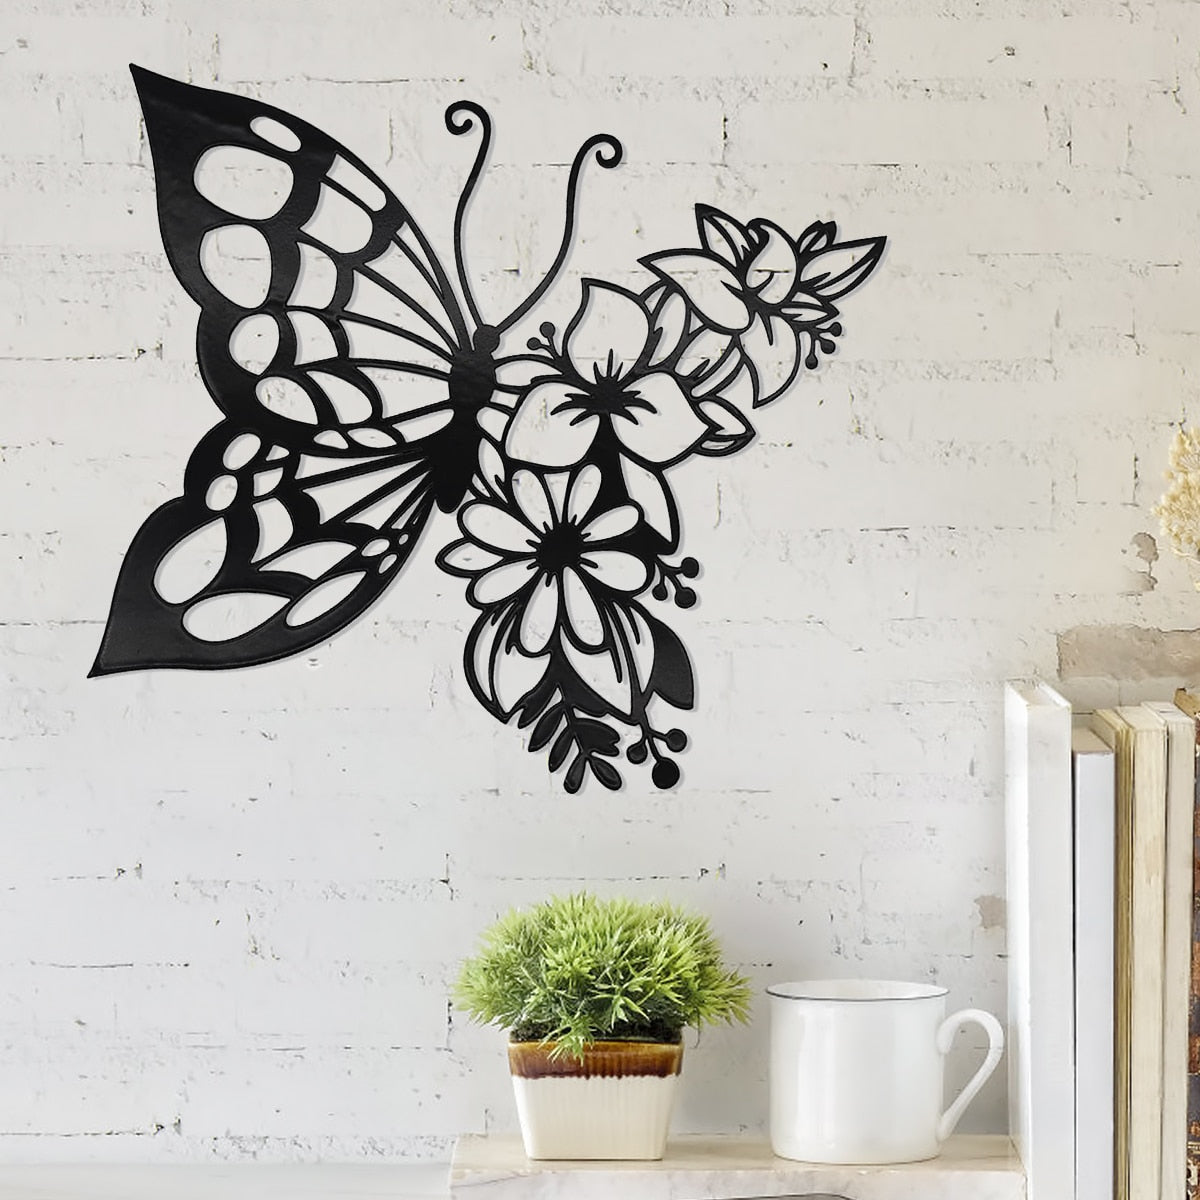 Metal Wall Art Elegant Butterfly Metal Wall Decor Modern Metal Wall Silhouette Easy Installation Home Decoration for Bedroom